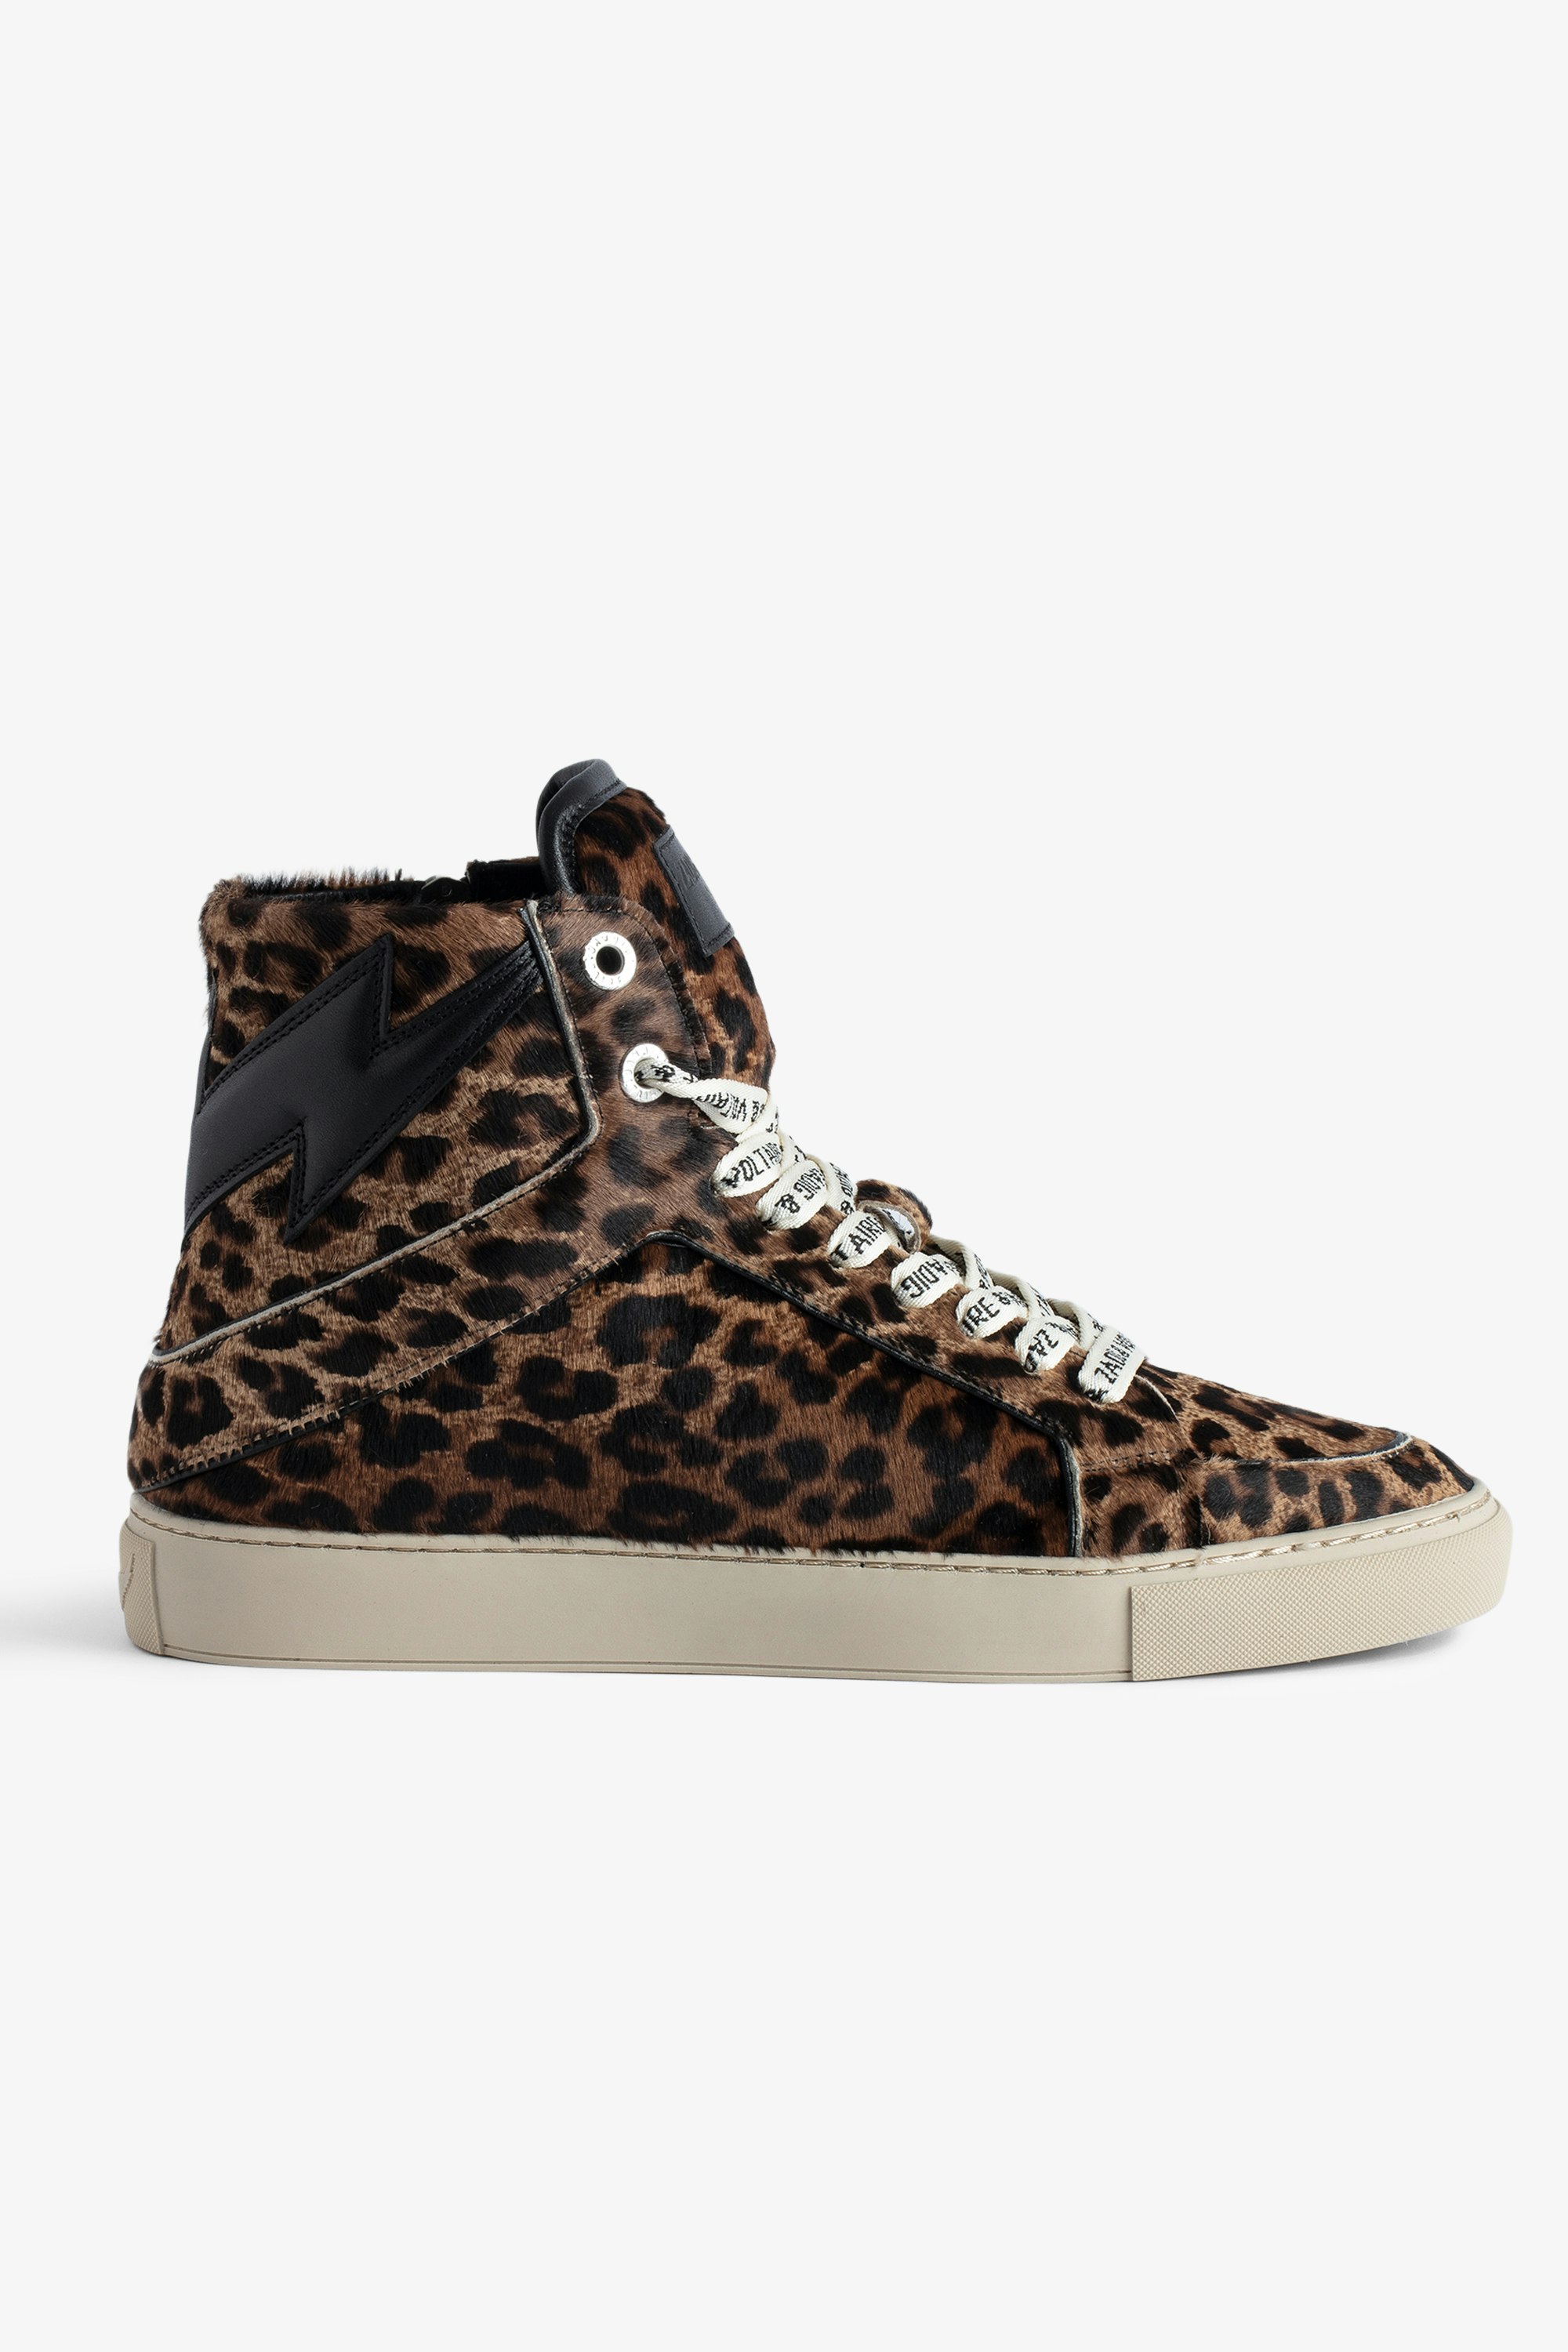 ZV1747 High Flash High-Top Trainers - Women’s leopard-effect brown leather high-top trainers with lightning bolt panels.